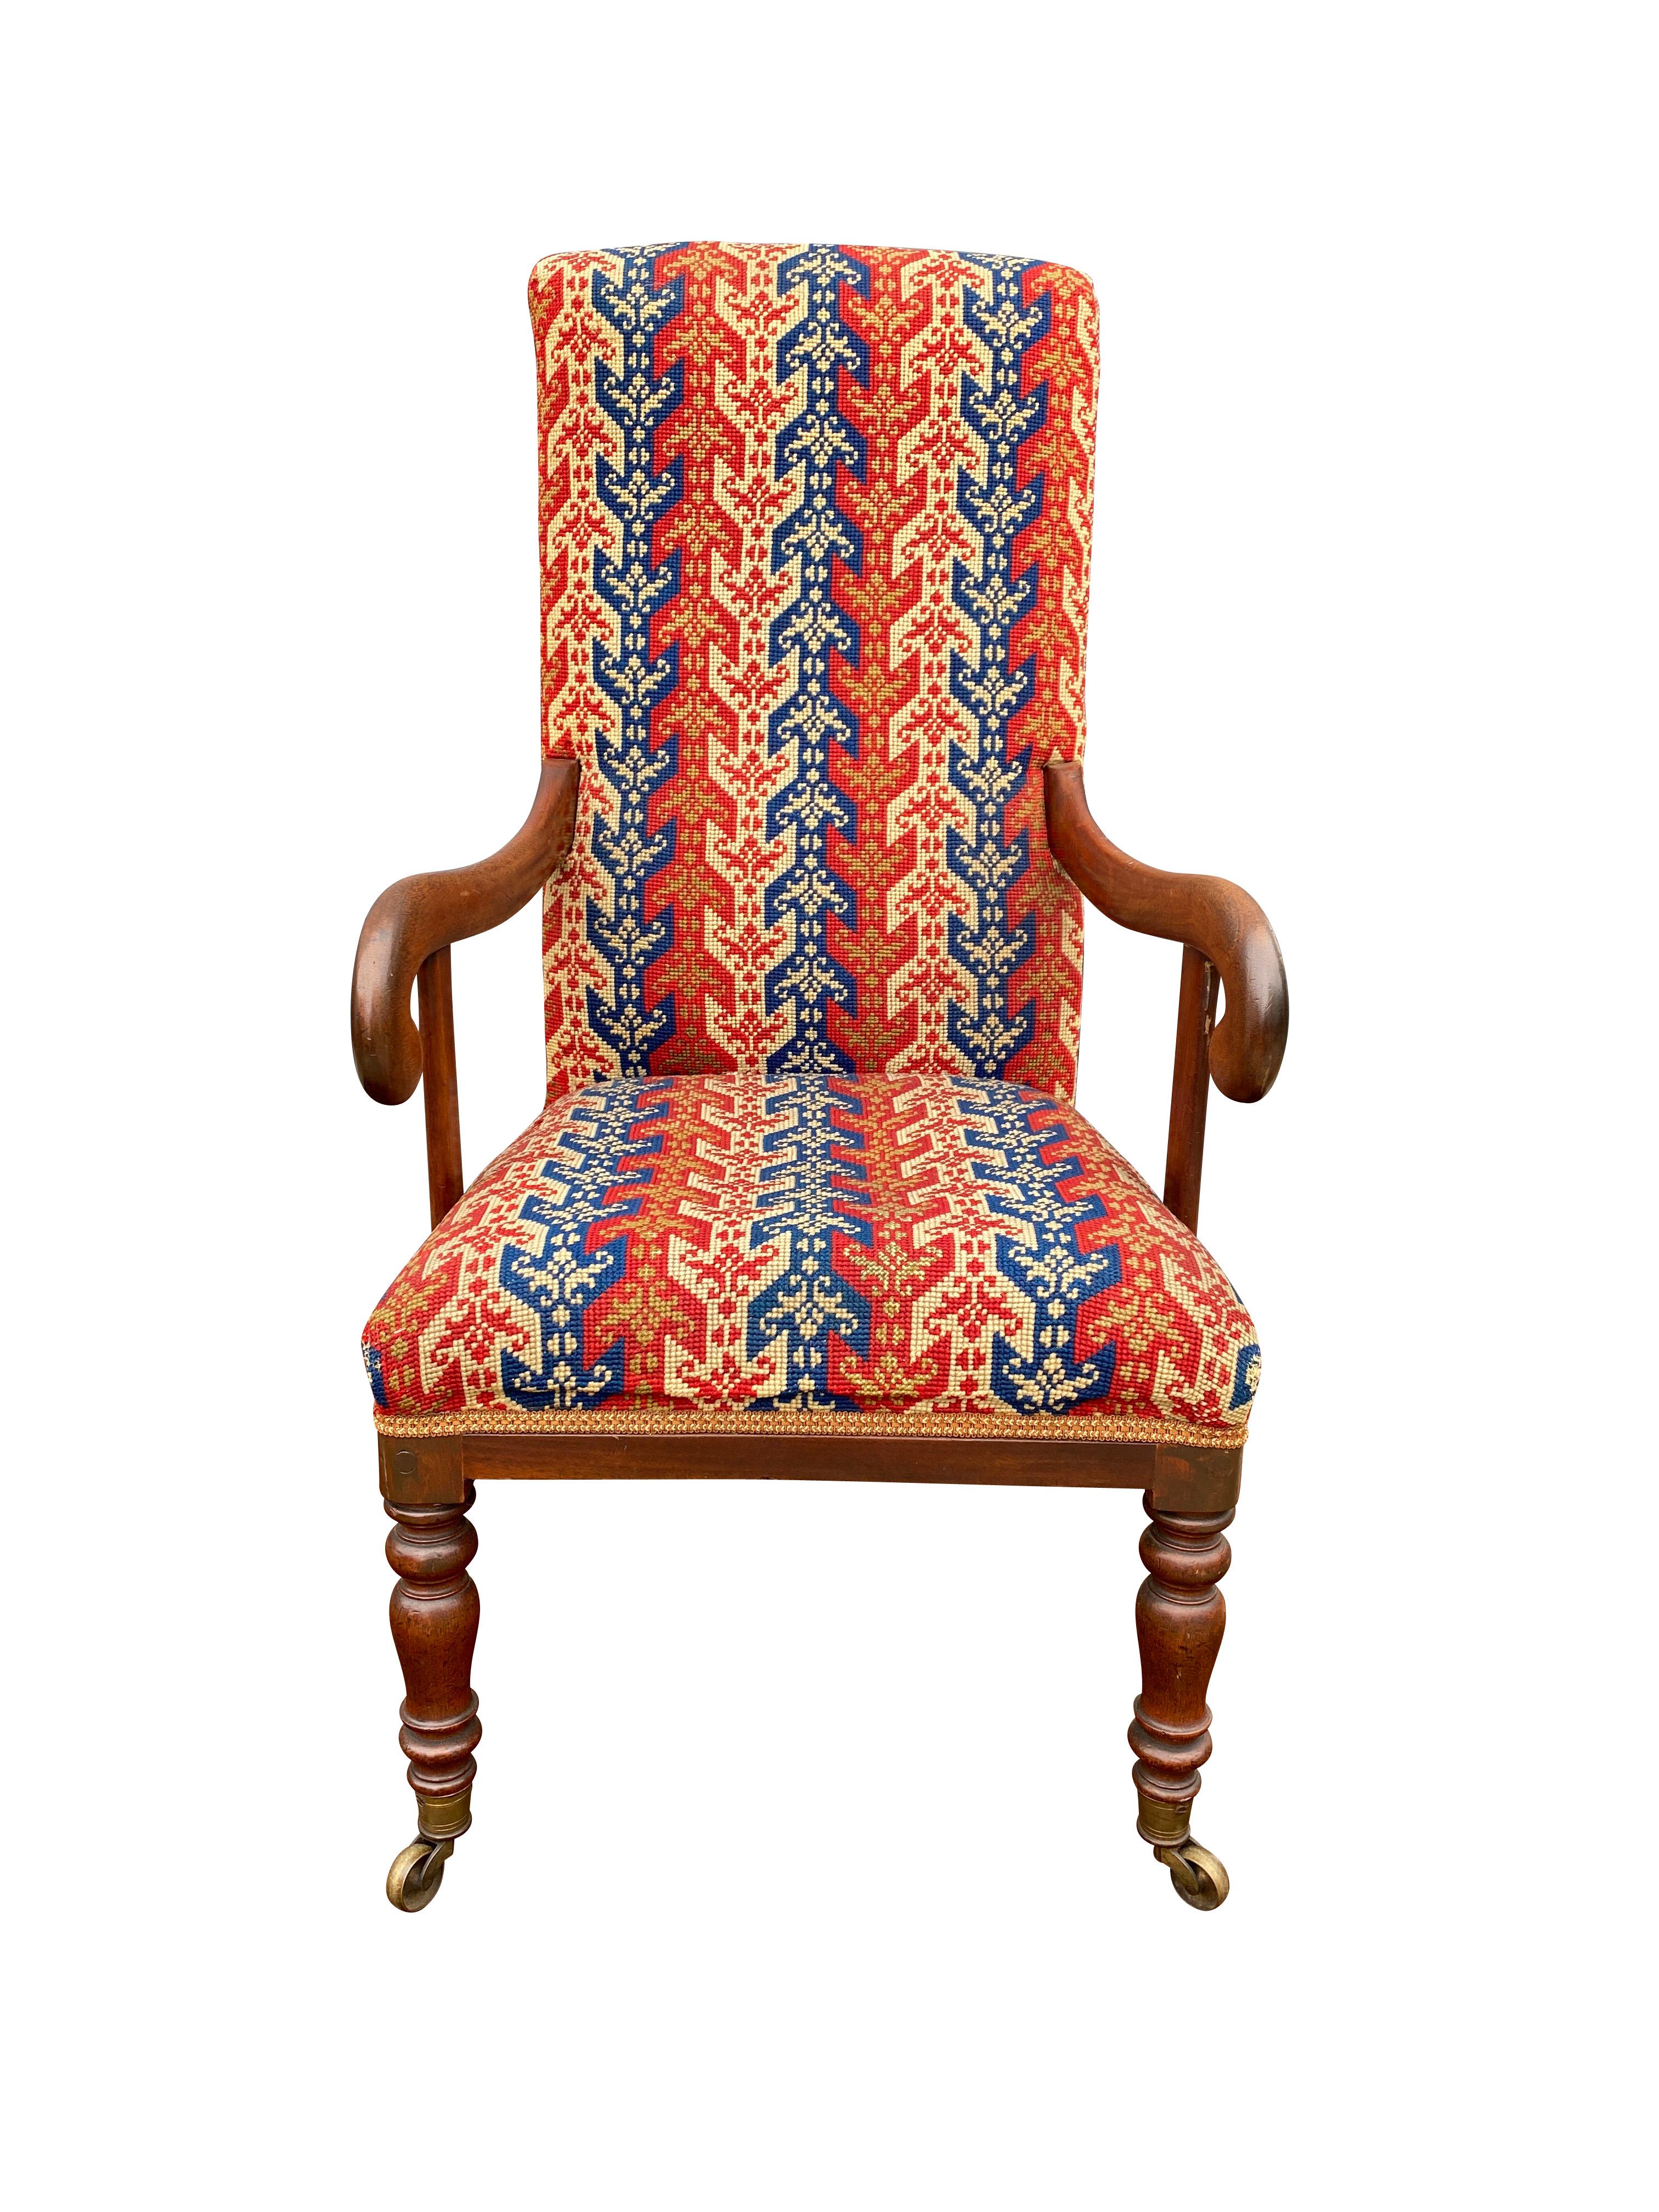 Rectangular upholstered back and seat, scrolled arms and raised on turned legs and casters.